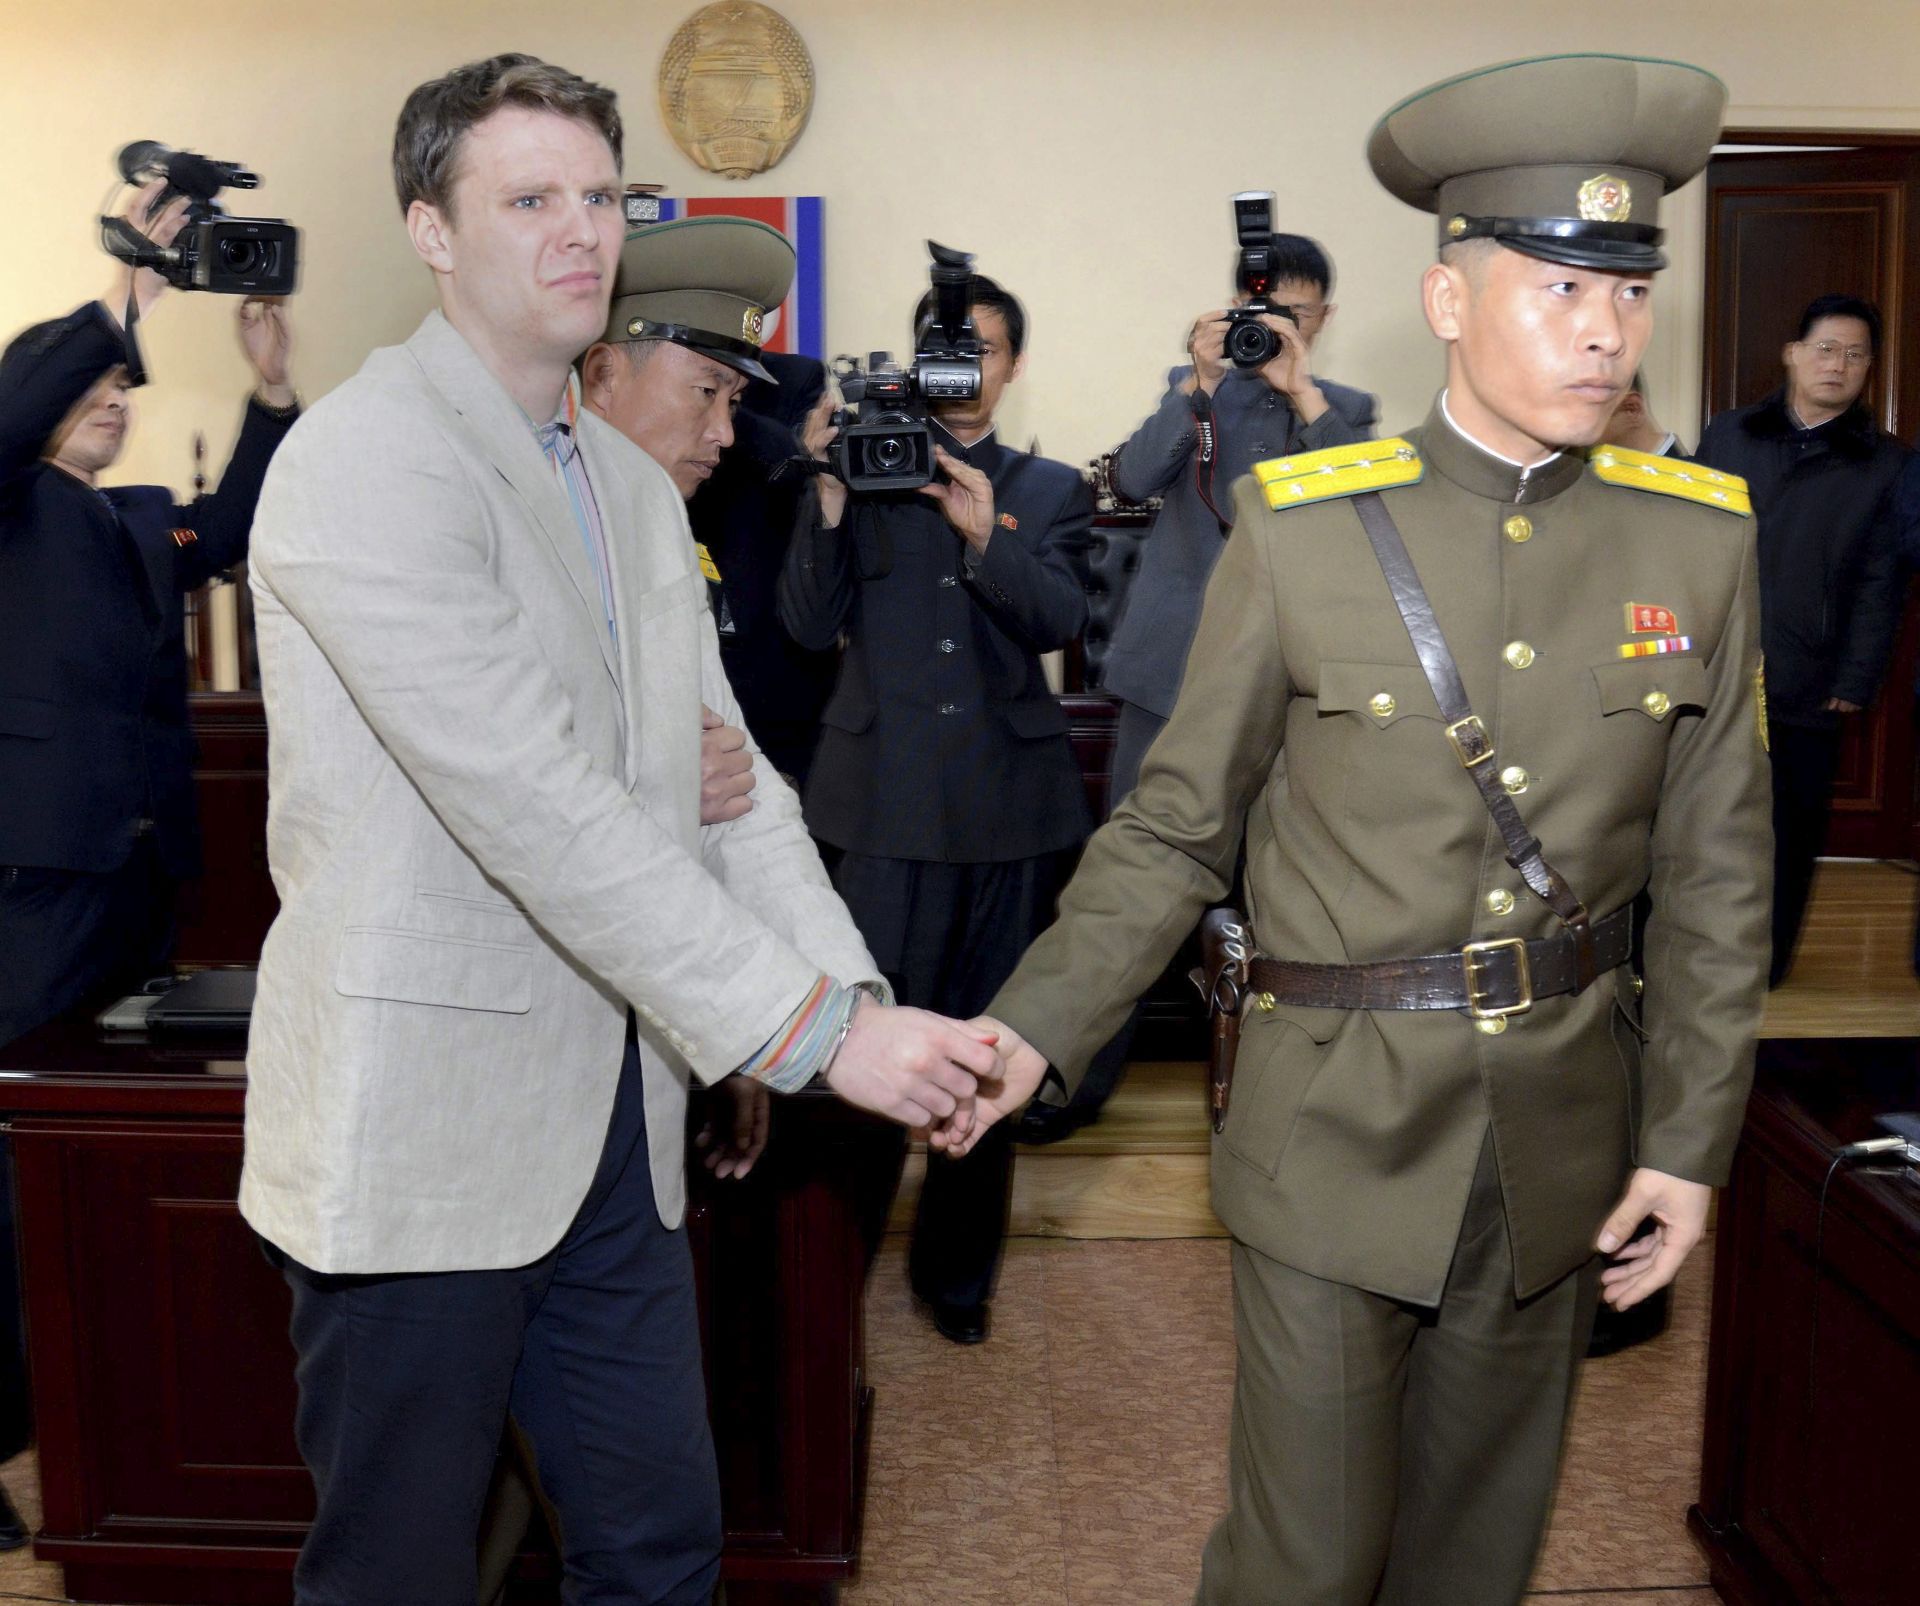 epa05214149 A photo provided by the official Korean Central News Agency (KCNA) shows US student Otto Frederick Warmbier (L) in relation to his trial held by The Supreme Court of the Democratic People's Republic of Korea, in Pyongyang, North Korea, 16 March 2016. Warmbier, a student at the University of Virginia, was sentenced to 15 years in prison for a crime against North Korea, international reports stated. Warmbier was arrested in January for allegedly trying to steal a banner with a political message from his hotel in North Korea.  EPA/KCNA   EDITORIAL USE ONLY